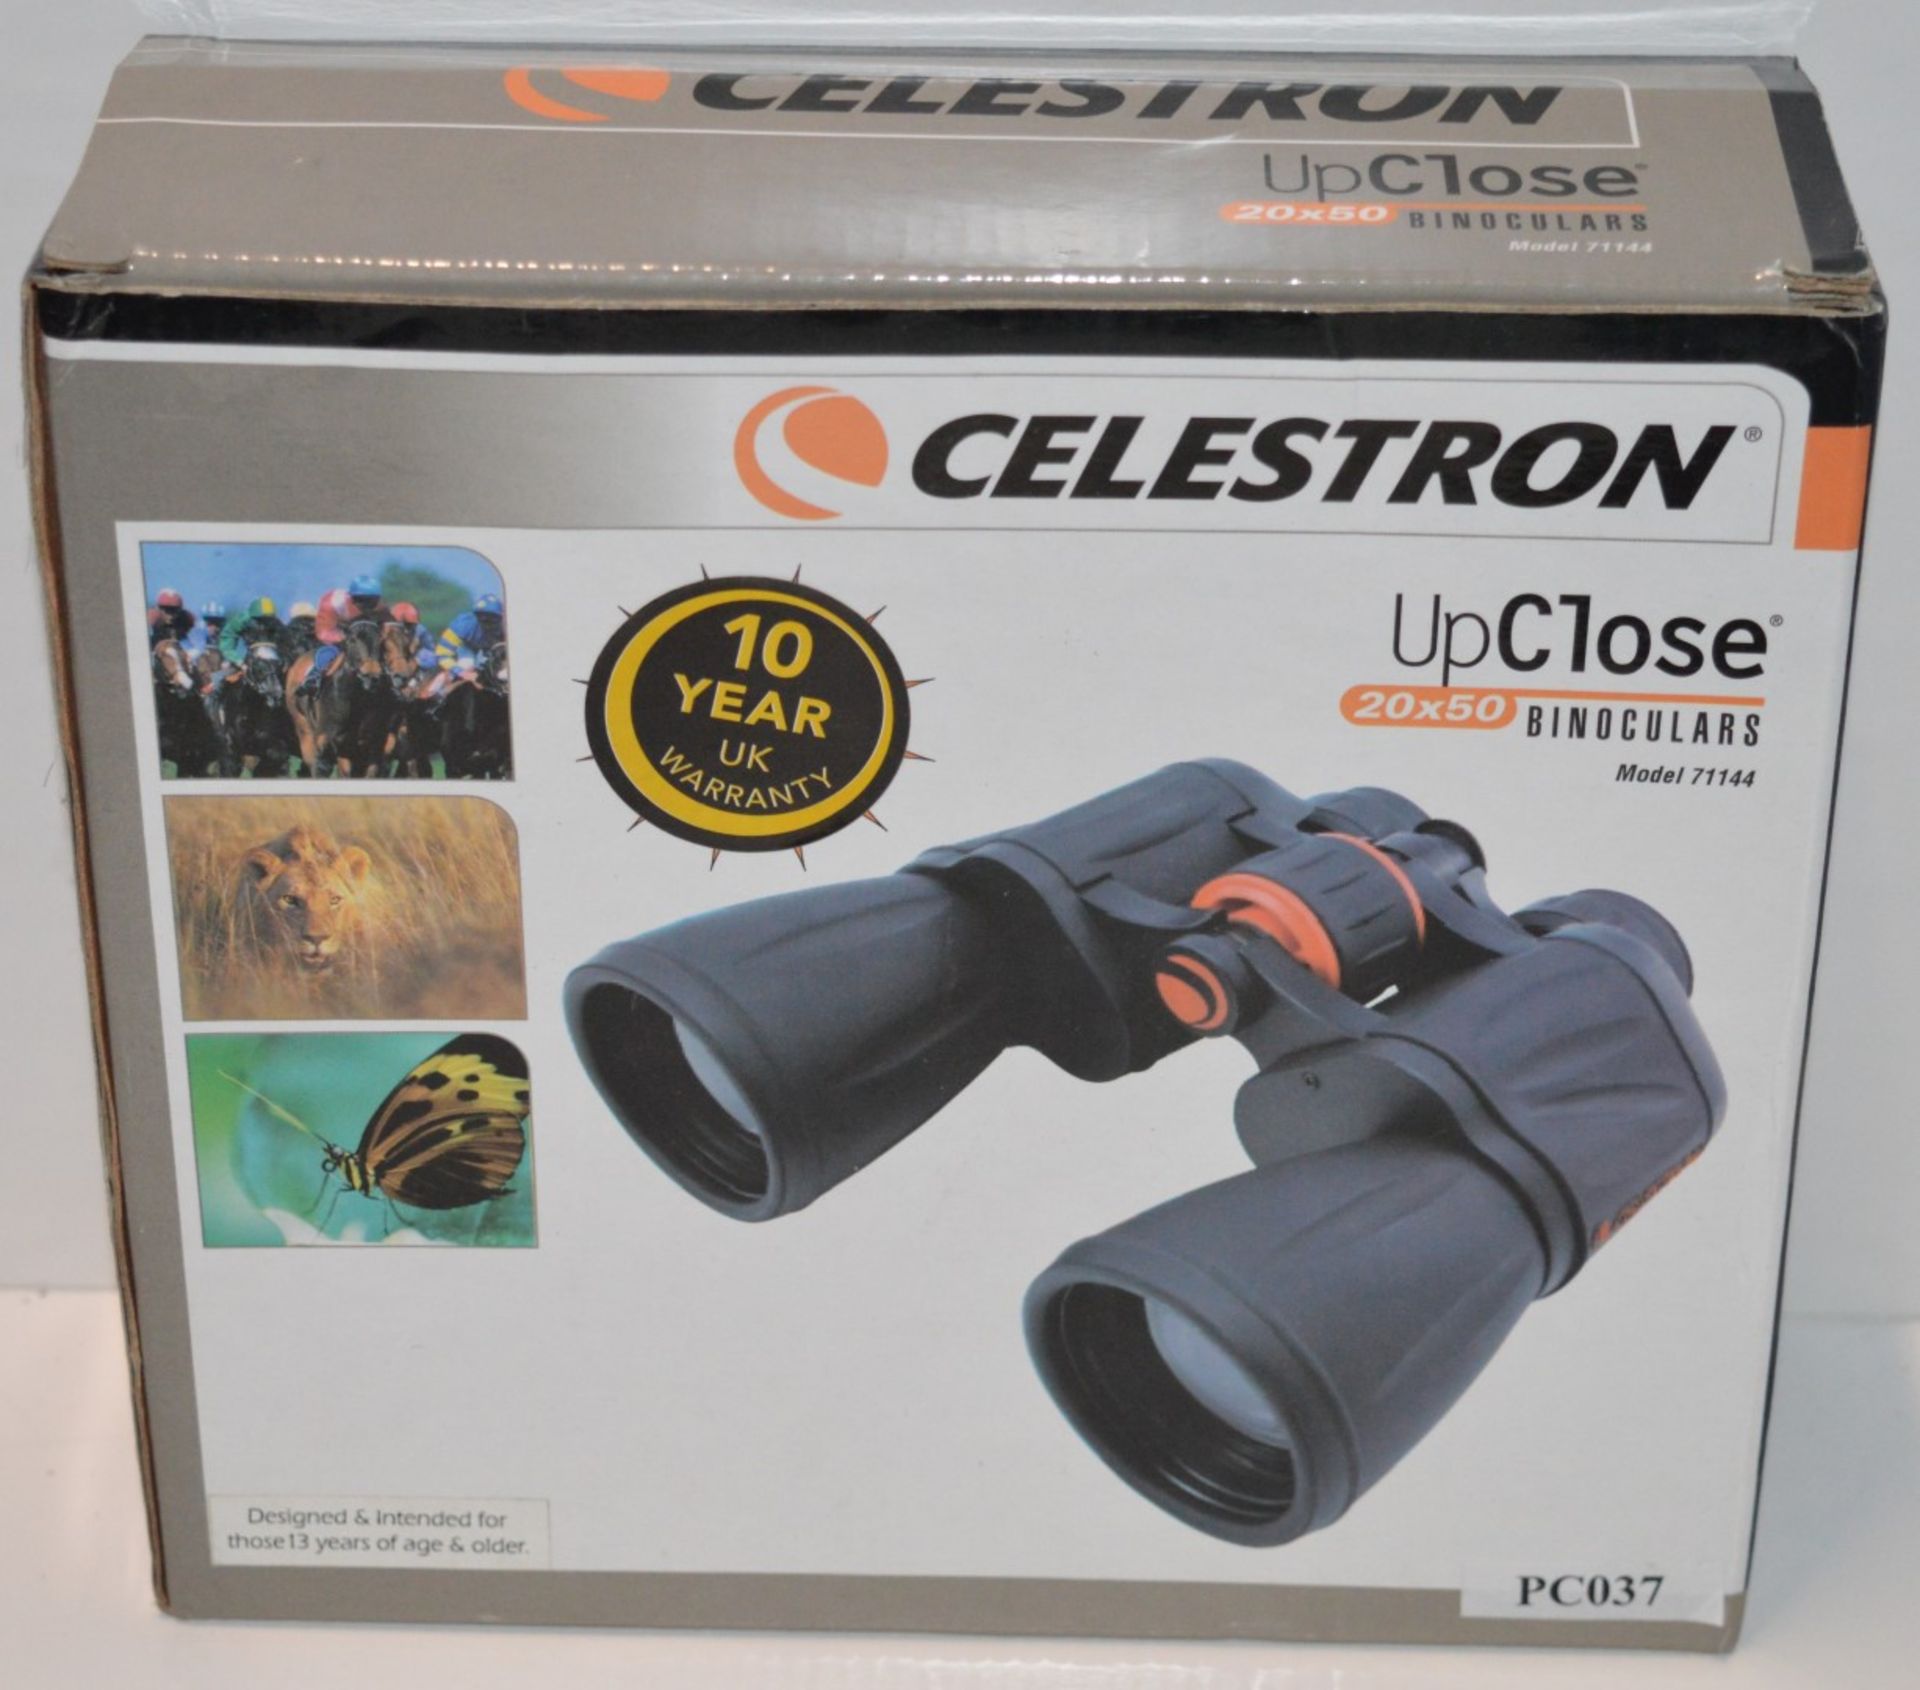 1 x Celestron Upclose 20x50 Binoculars - Brand New and Boxed - Fully Coated and Weather